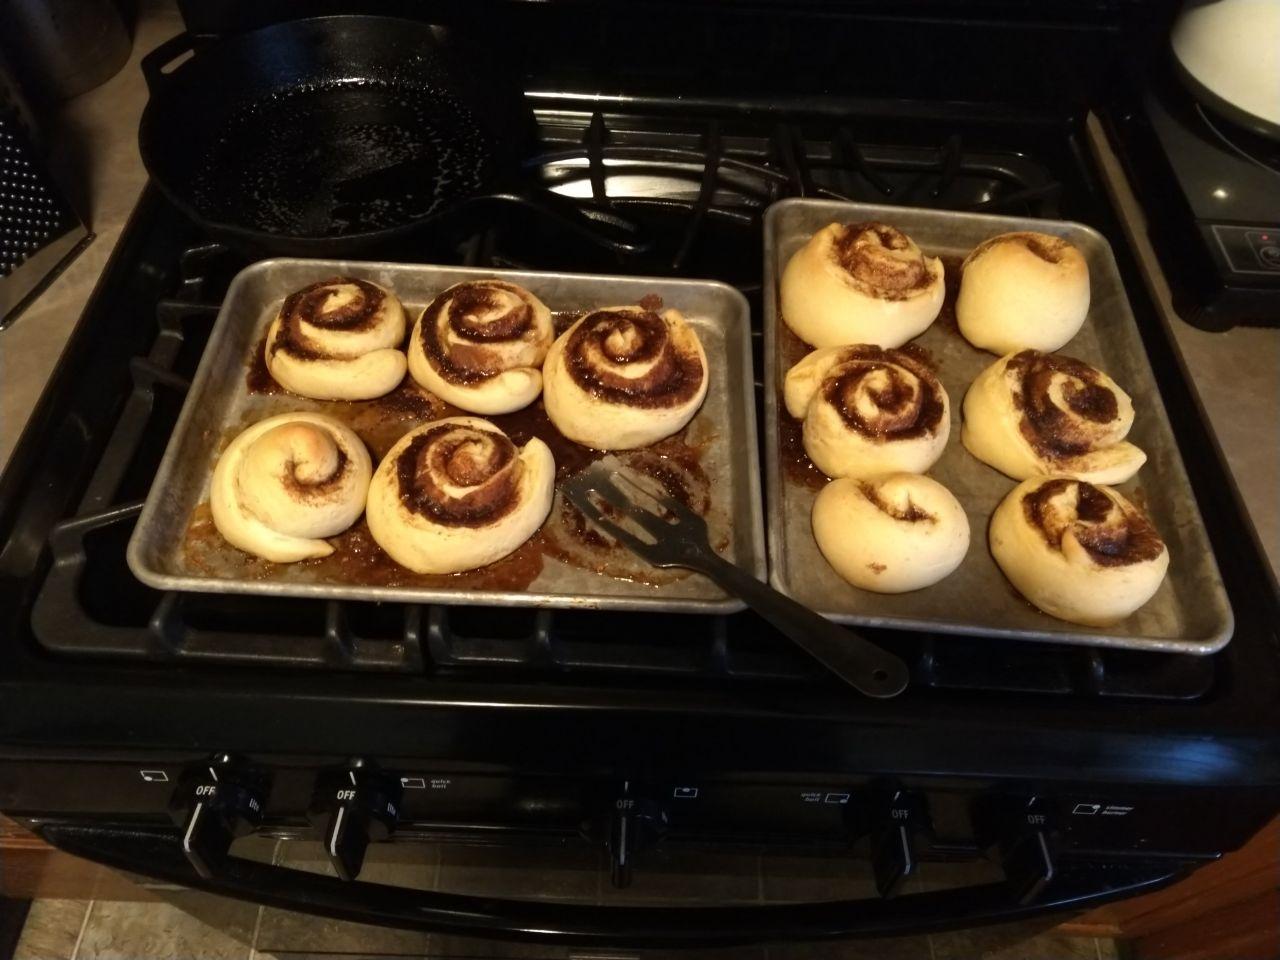 Cinnamon rolls after baking, cooling on the stove.